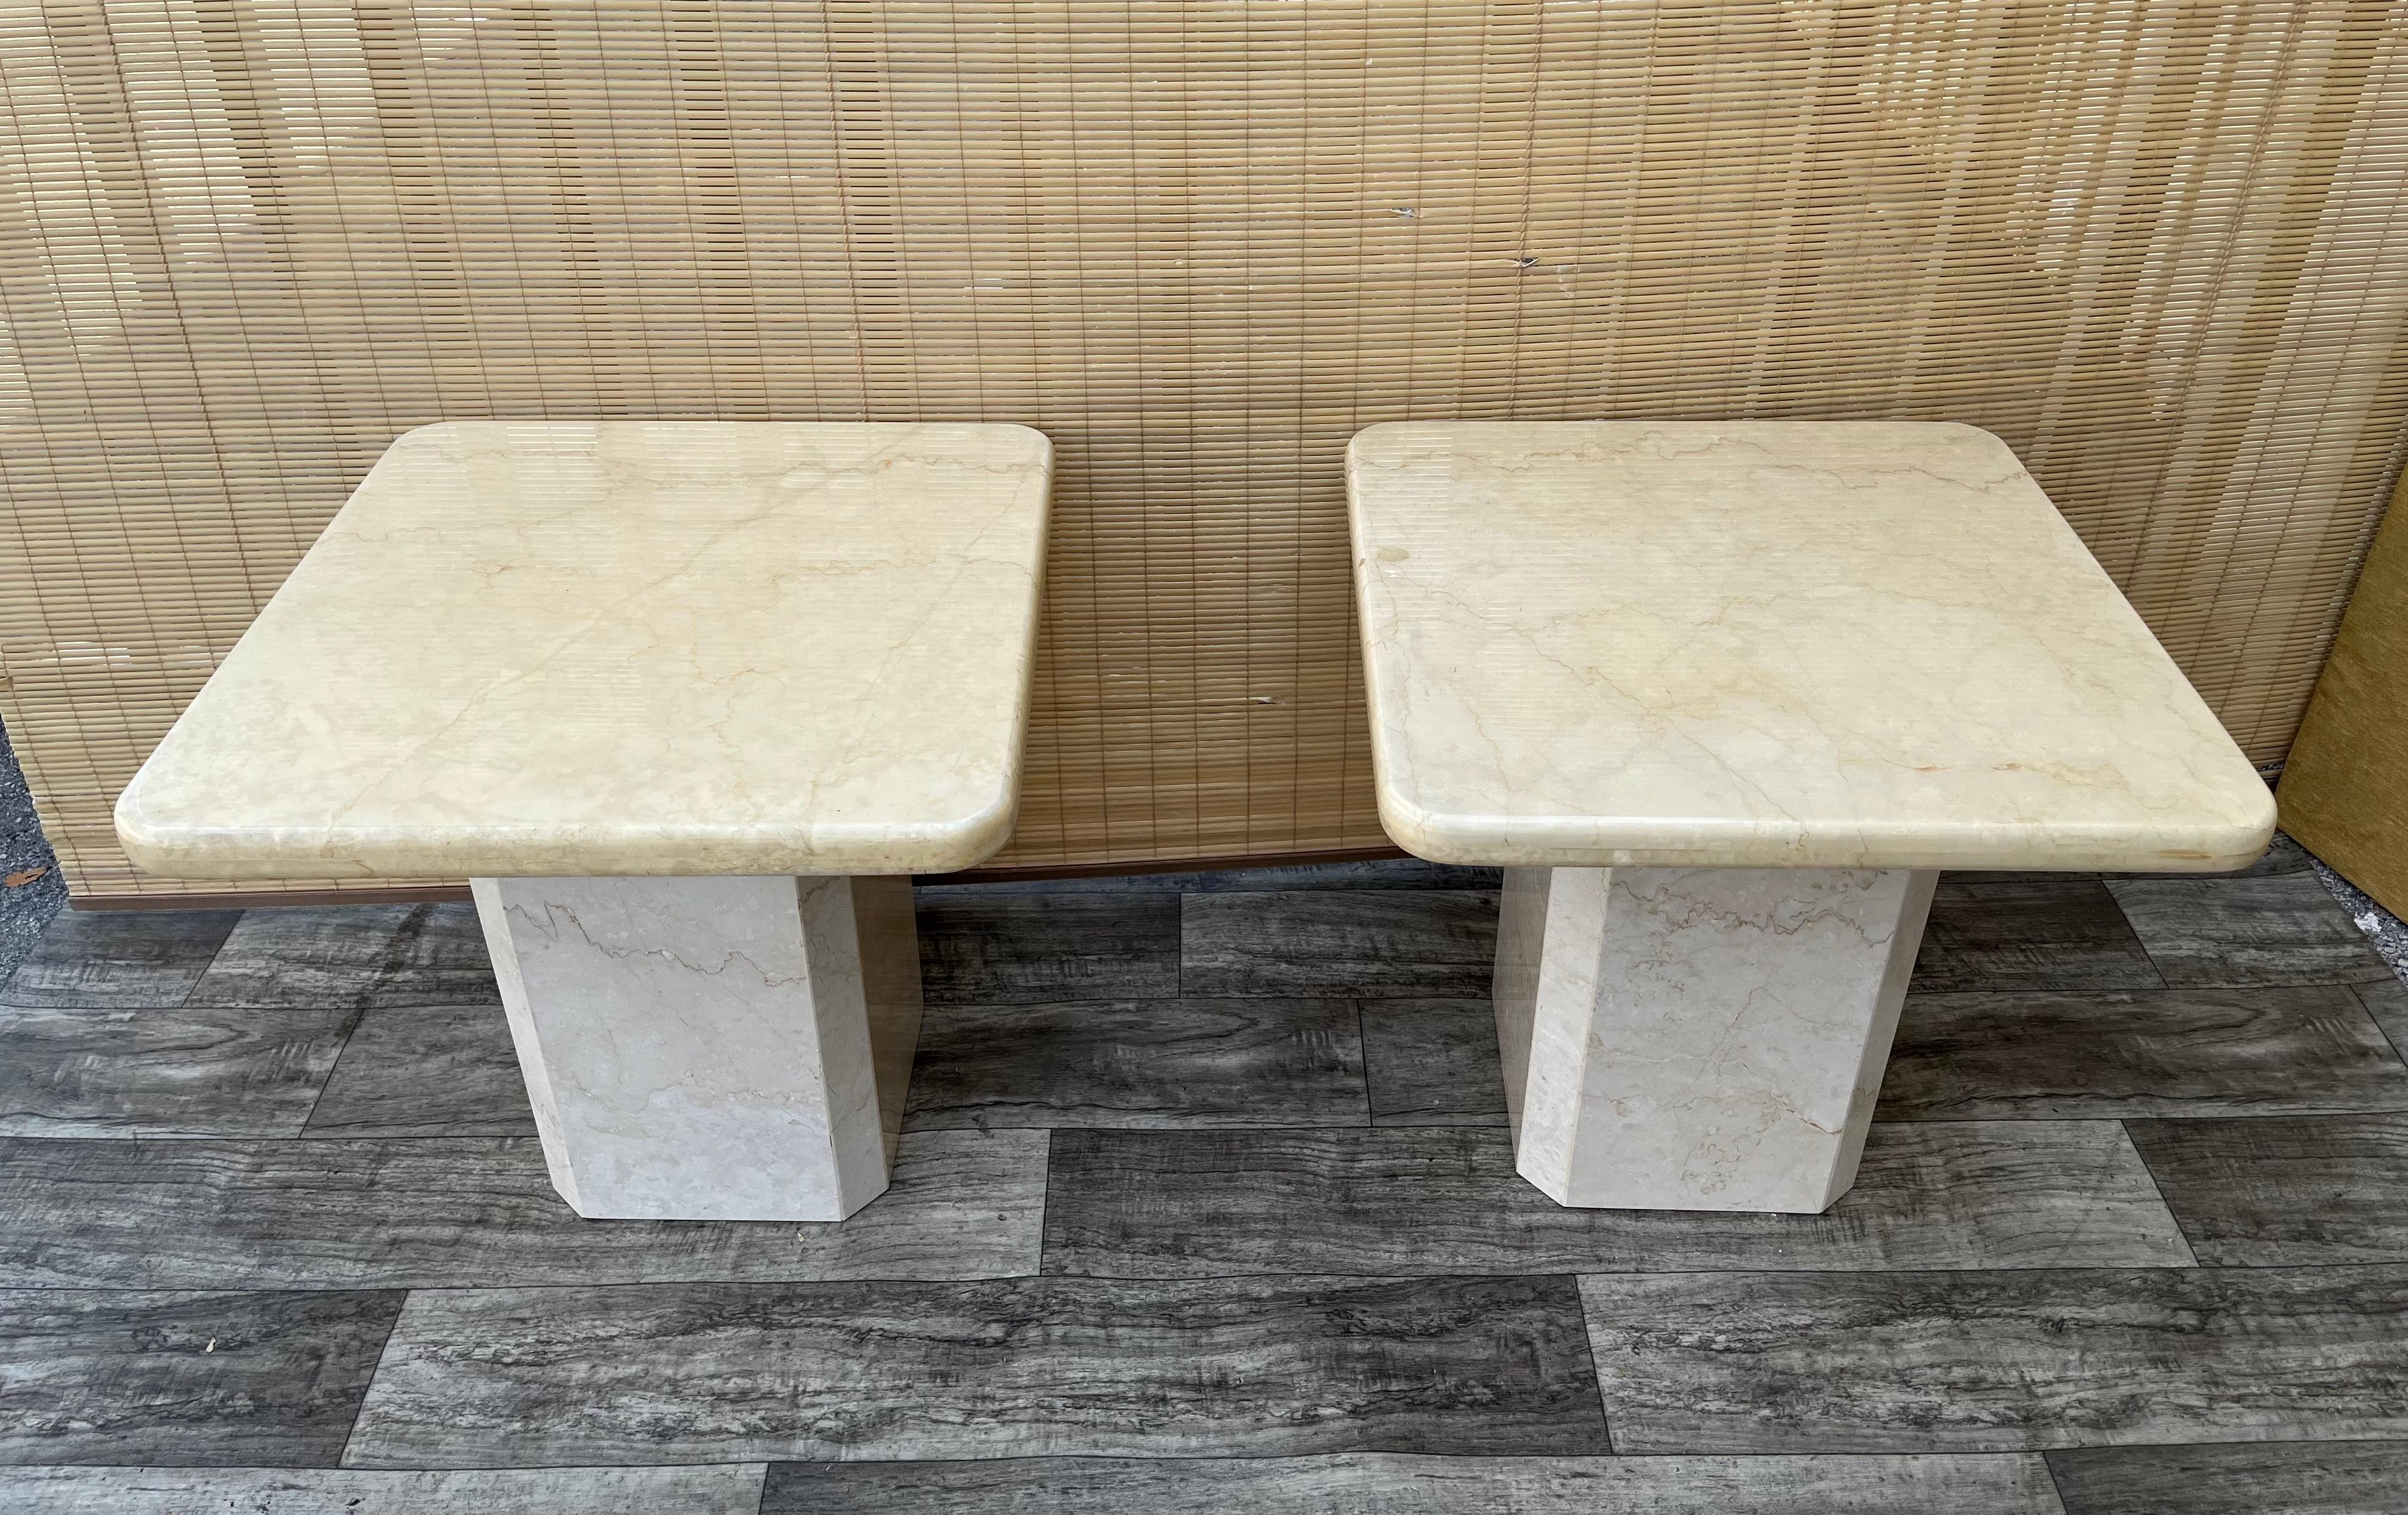 Vintage Pair of Postmodern Two Tones Italian Marble End Tables. Circa 1980s
Features a nicely curved border at edges and a gorgeous natural veins and two different tones stones.
The top are removable for easy storage and transportation.
In excellent